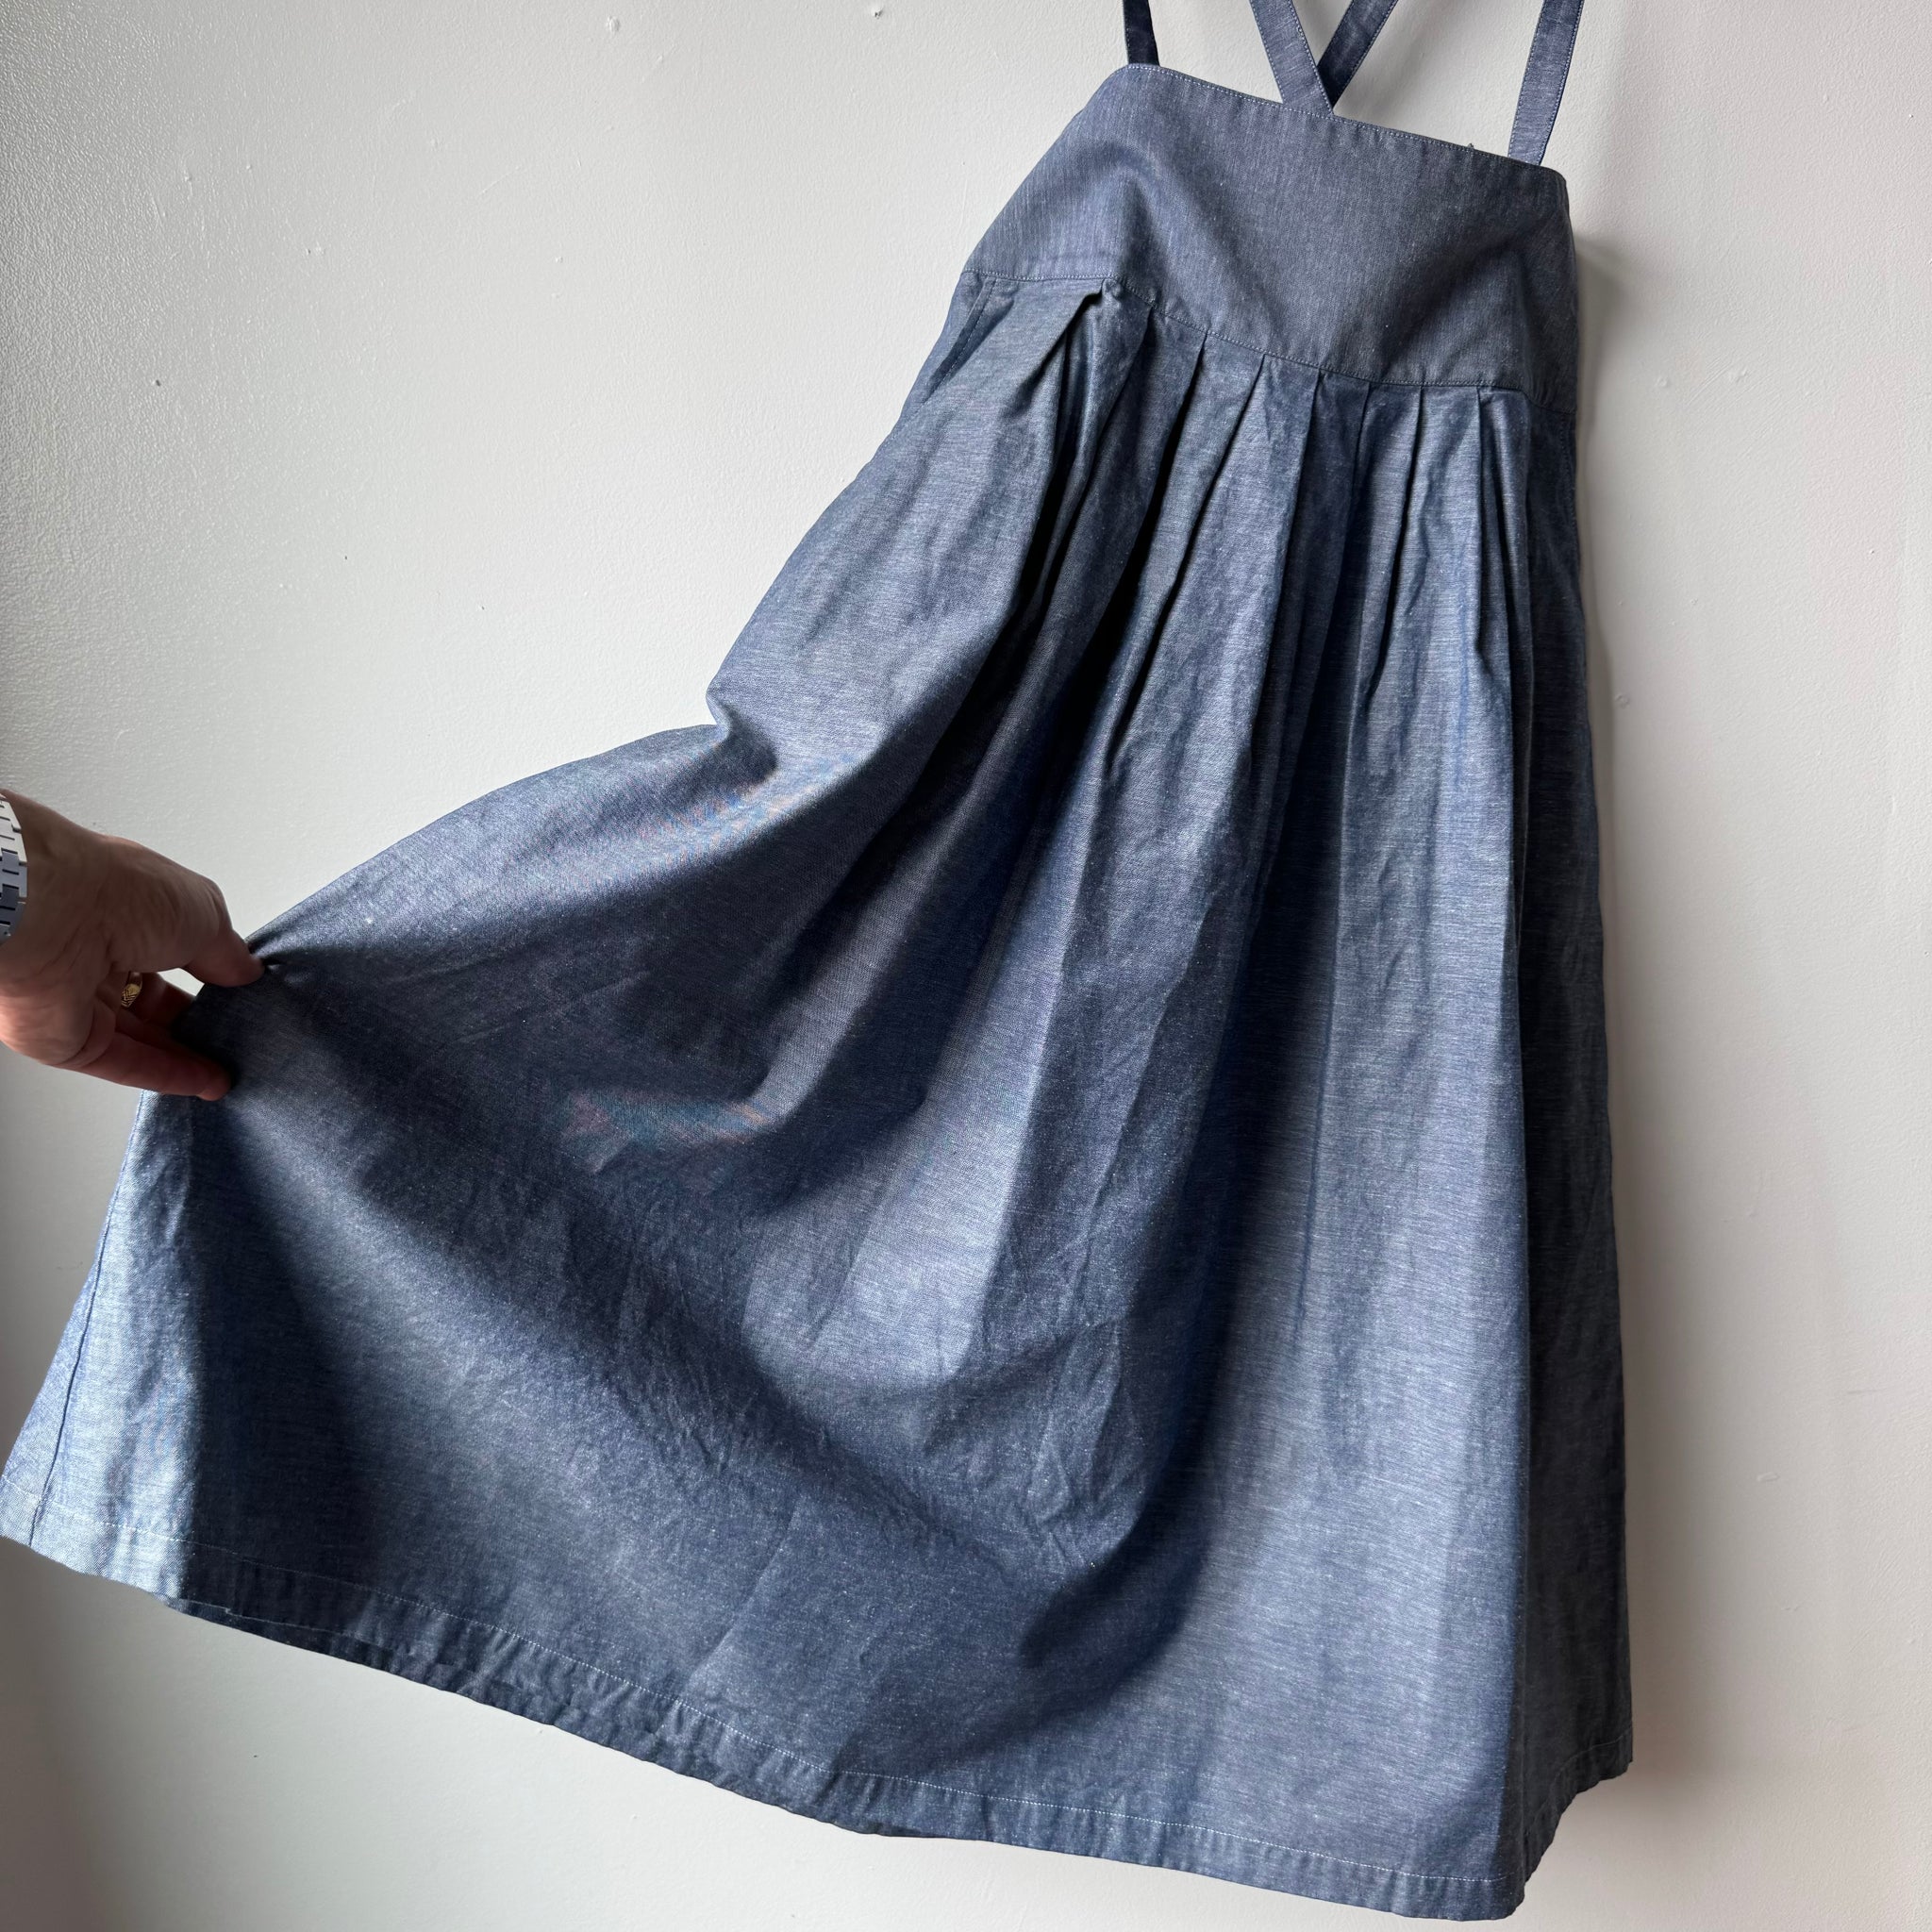 Chambray Suspender Skirt in Blue by Sarahwear